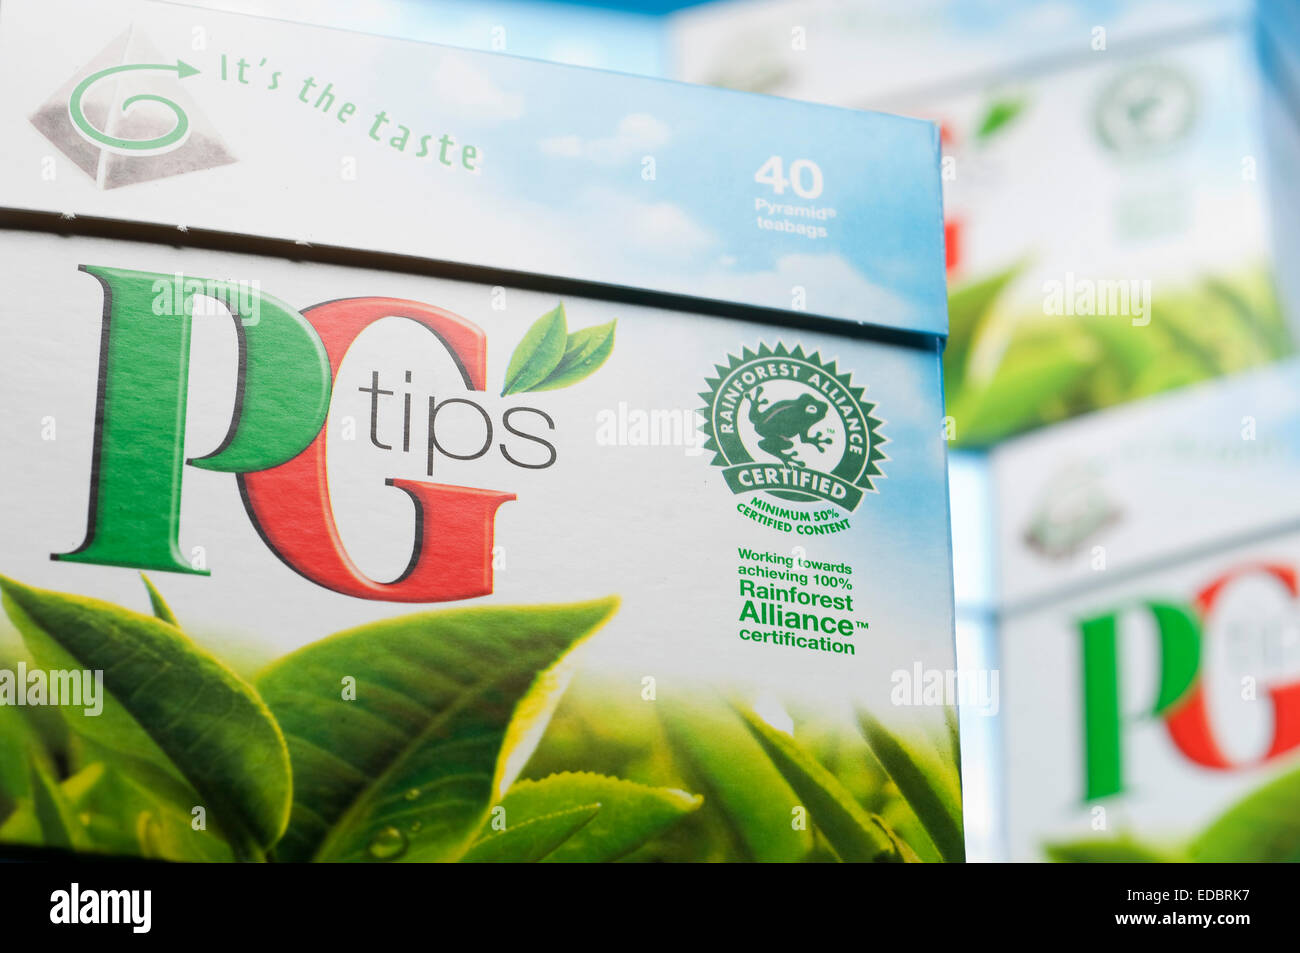 Pg tips pyramid tea bags hi-res stock photography and images - Alamy, pg  tips 